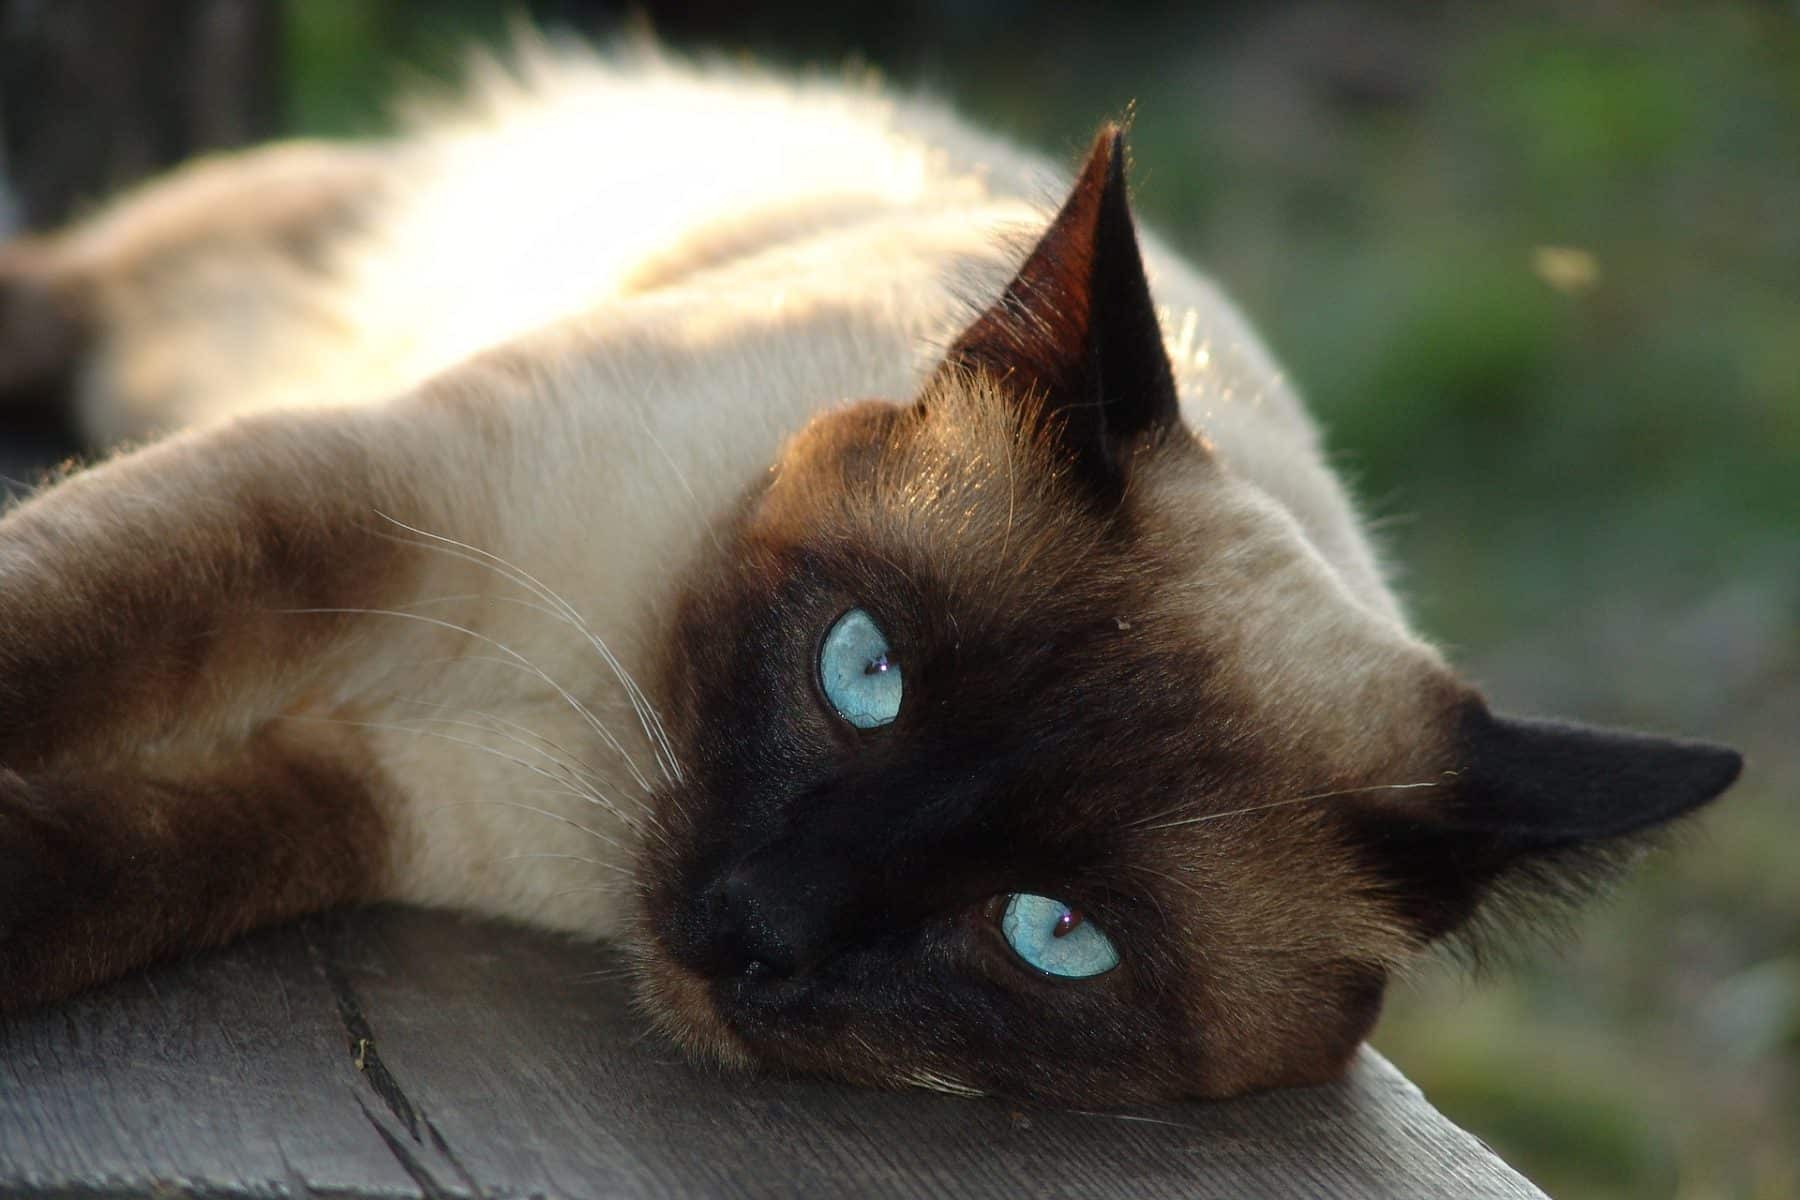 We Import Burmese Siamese And Tonkinese Cats From Thailand Thailand Is Home To An Incredible Race Of Cats With Distincti Tonkinese Cat Tonkinese Burmese Cat